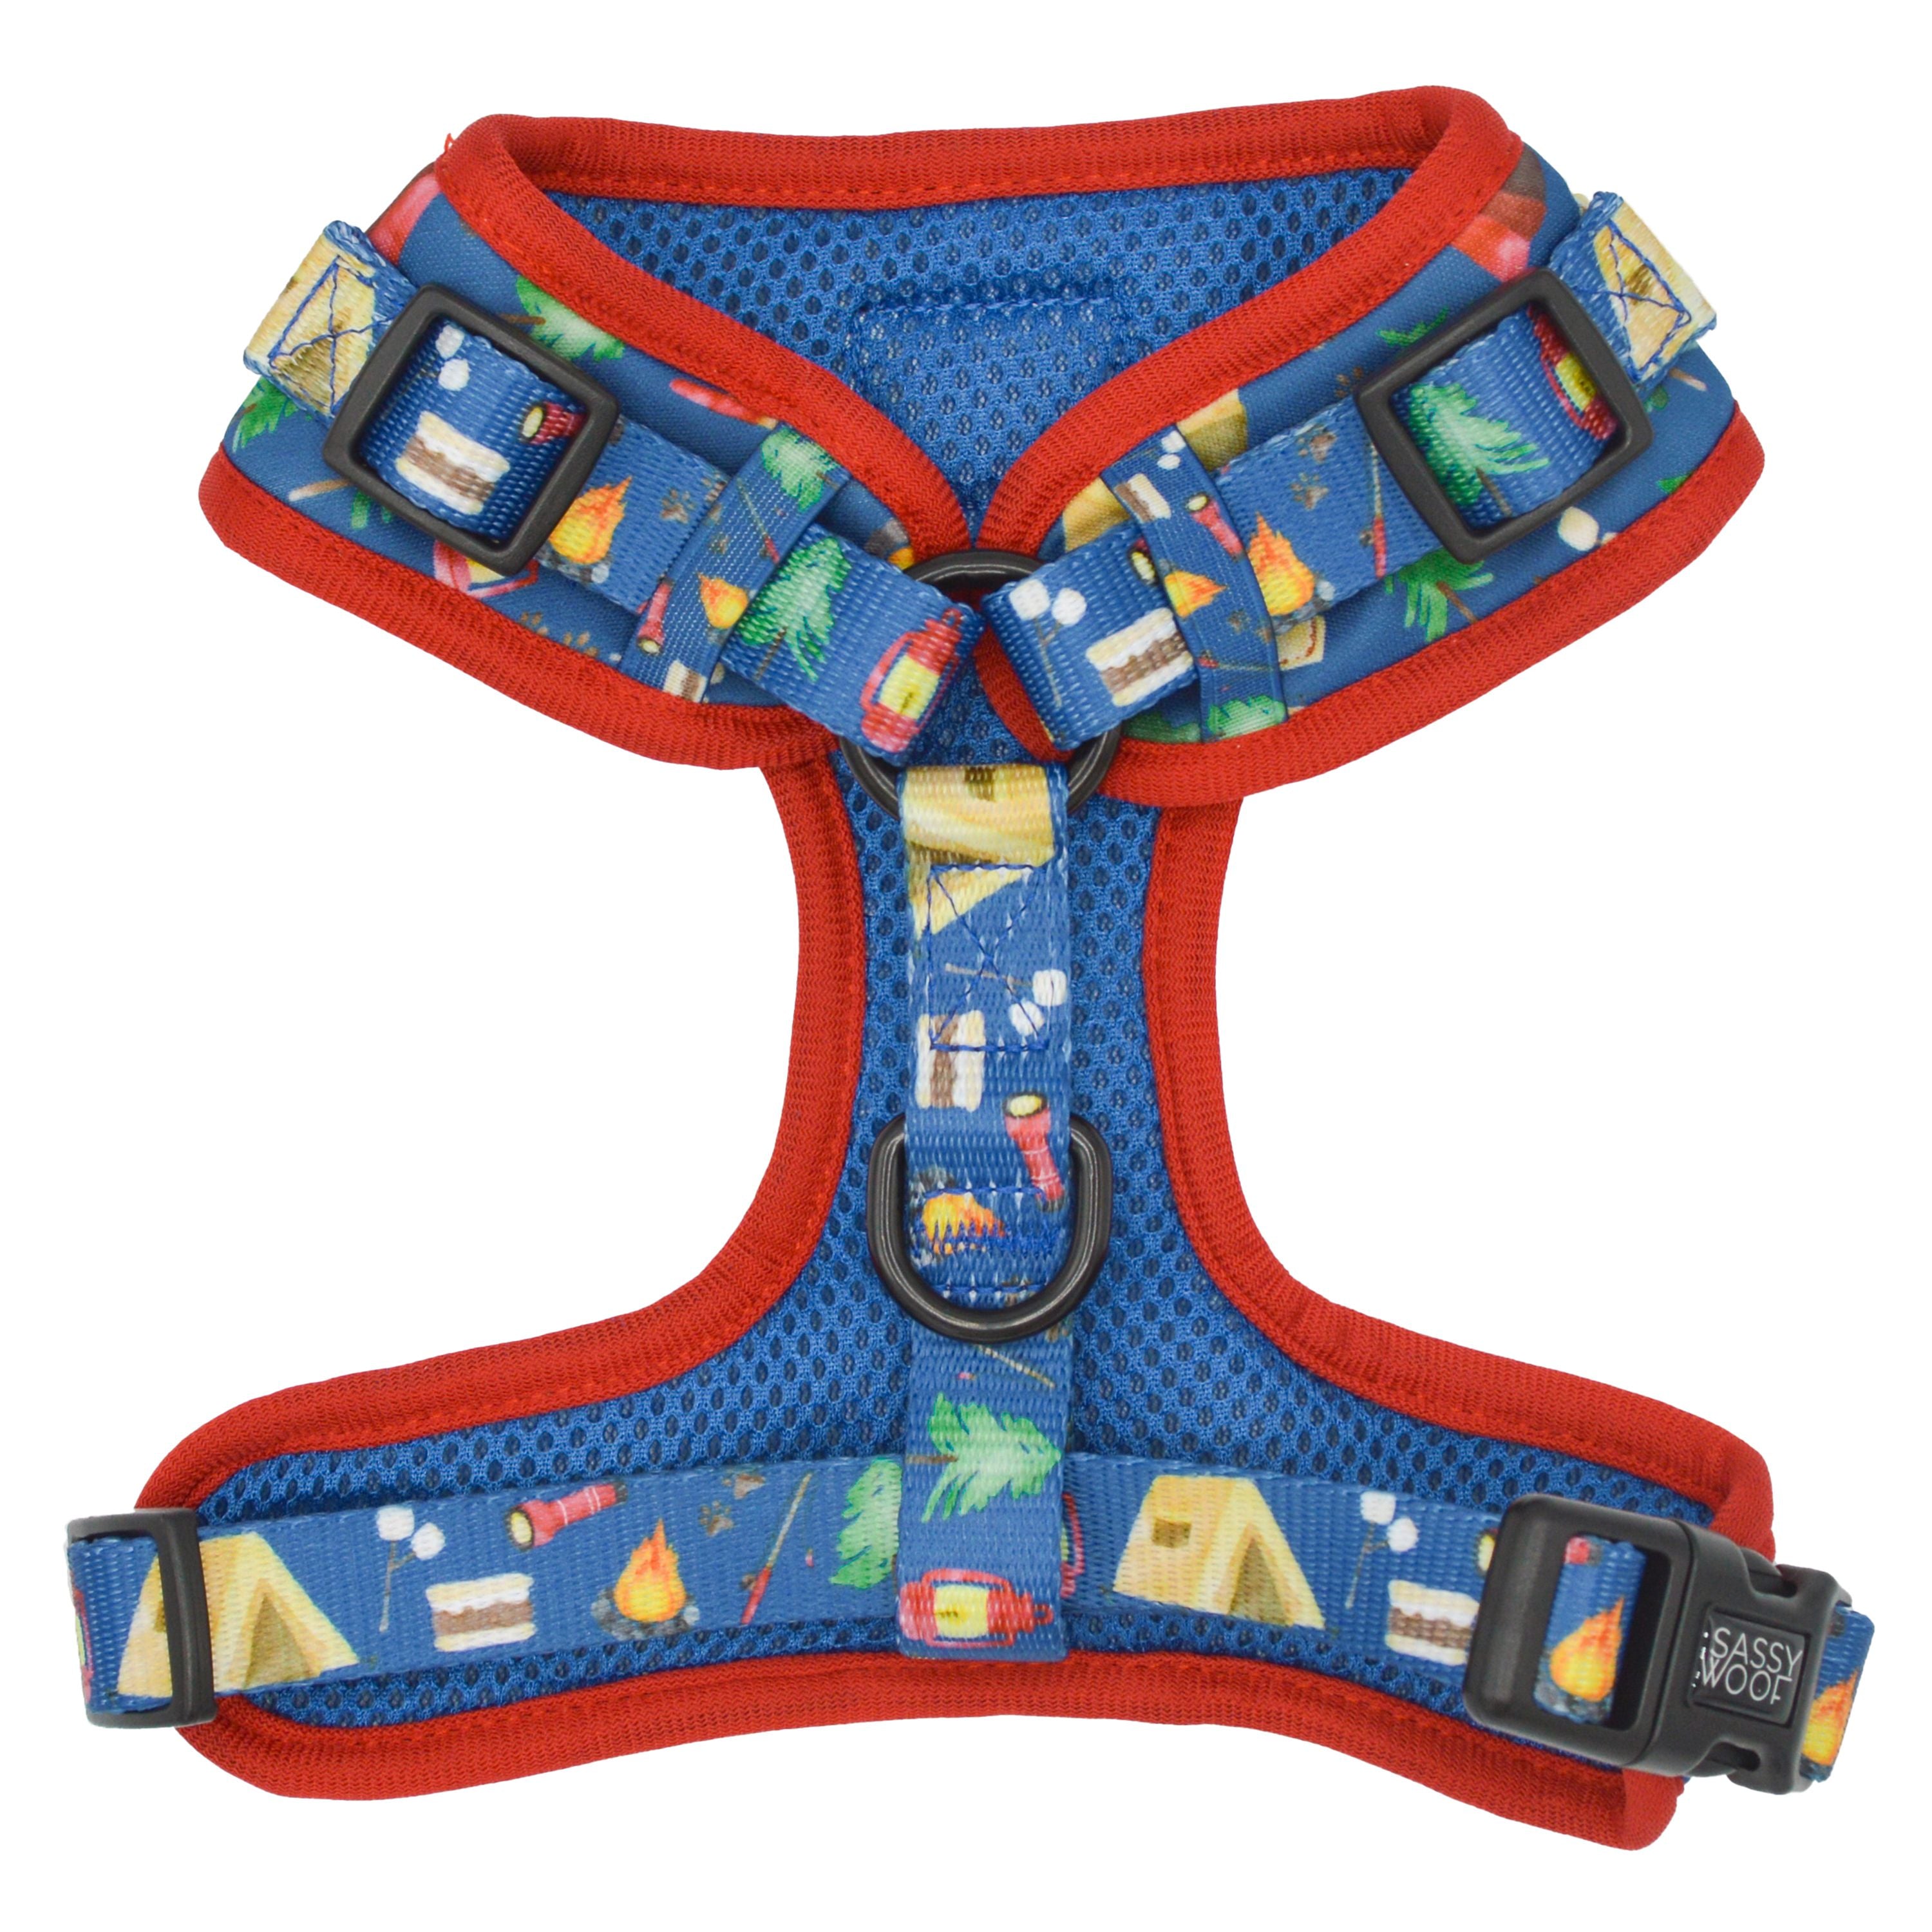 Sassy Woof Adjustable Harness - Woof Scout [CLEARANCE] - Henlo Pets